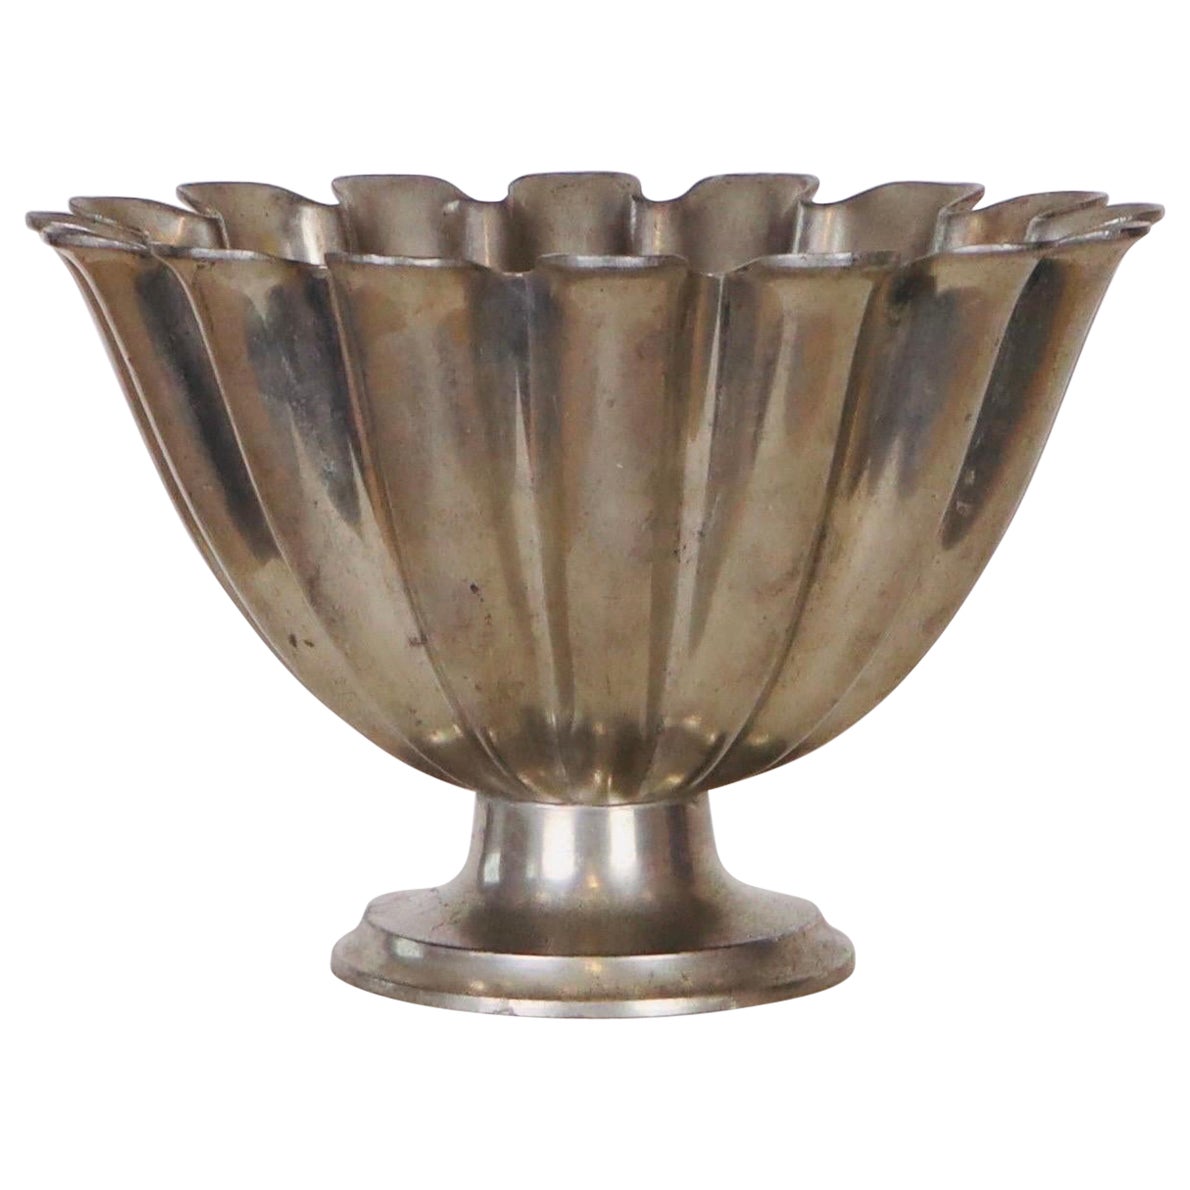 Scalloped pedestal pewter bowl by Just Andersen 1920s, Denmark